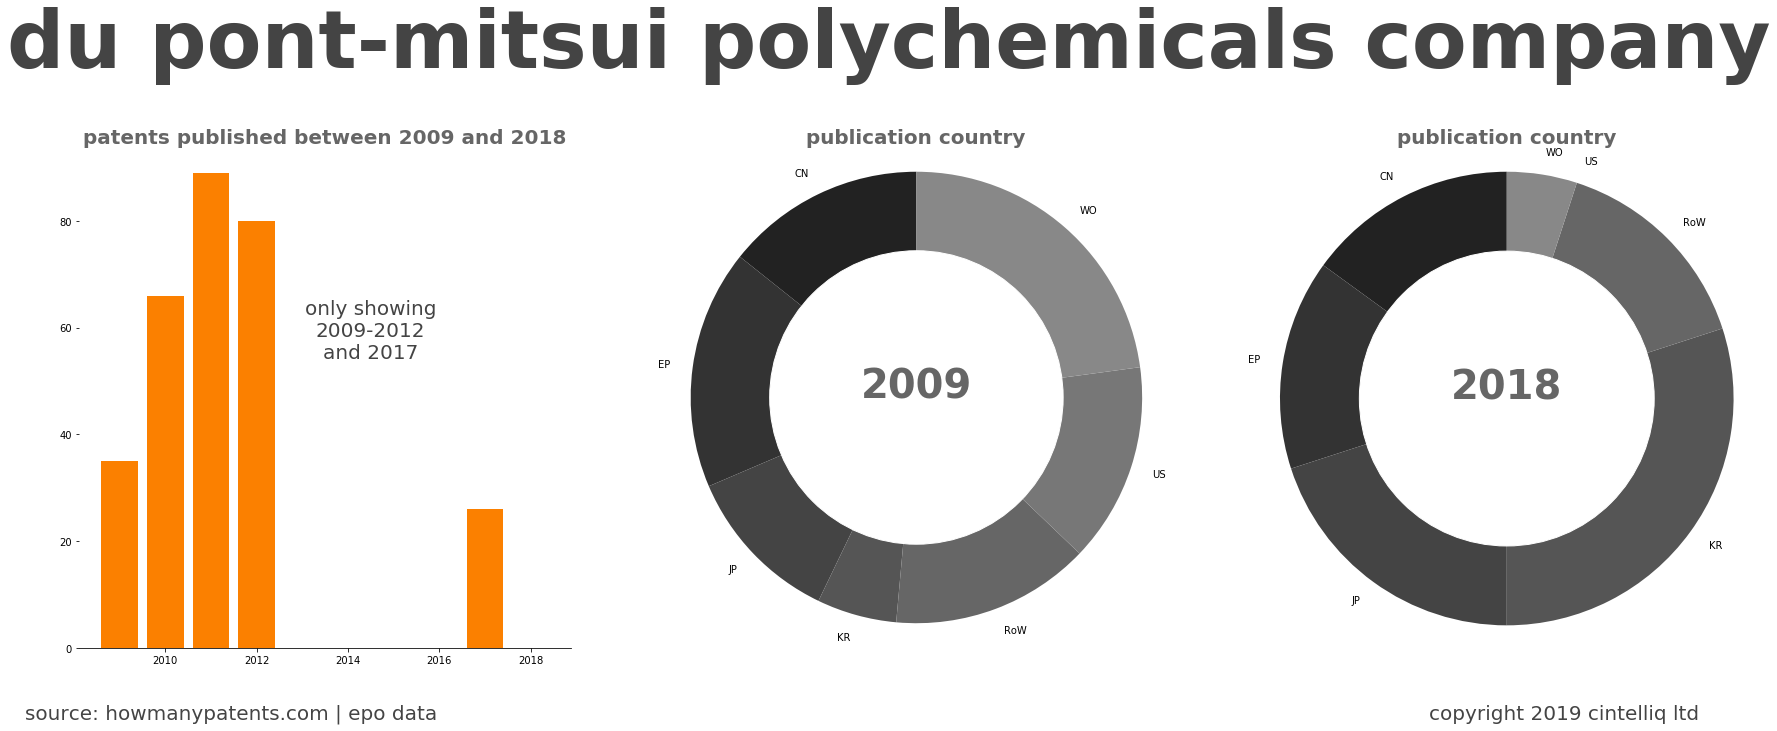 summary of patents for Du Pont-Mitsui Polychemicals Company